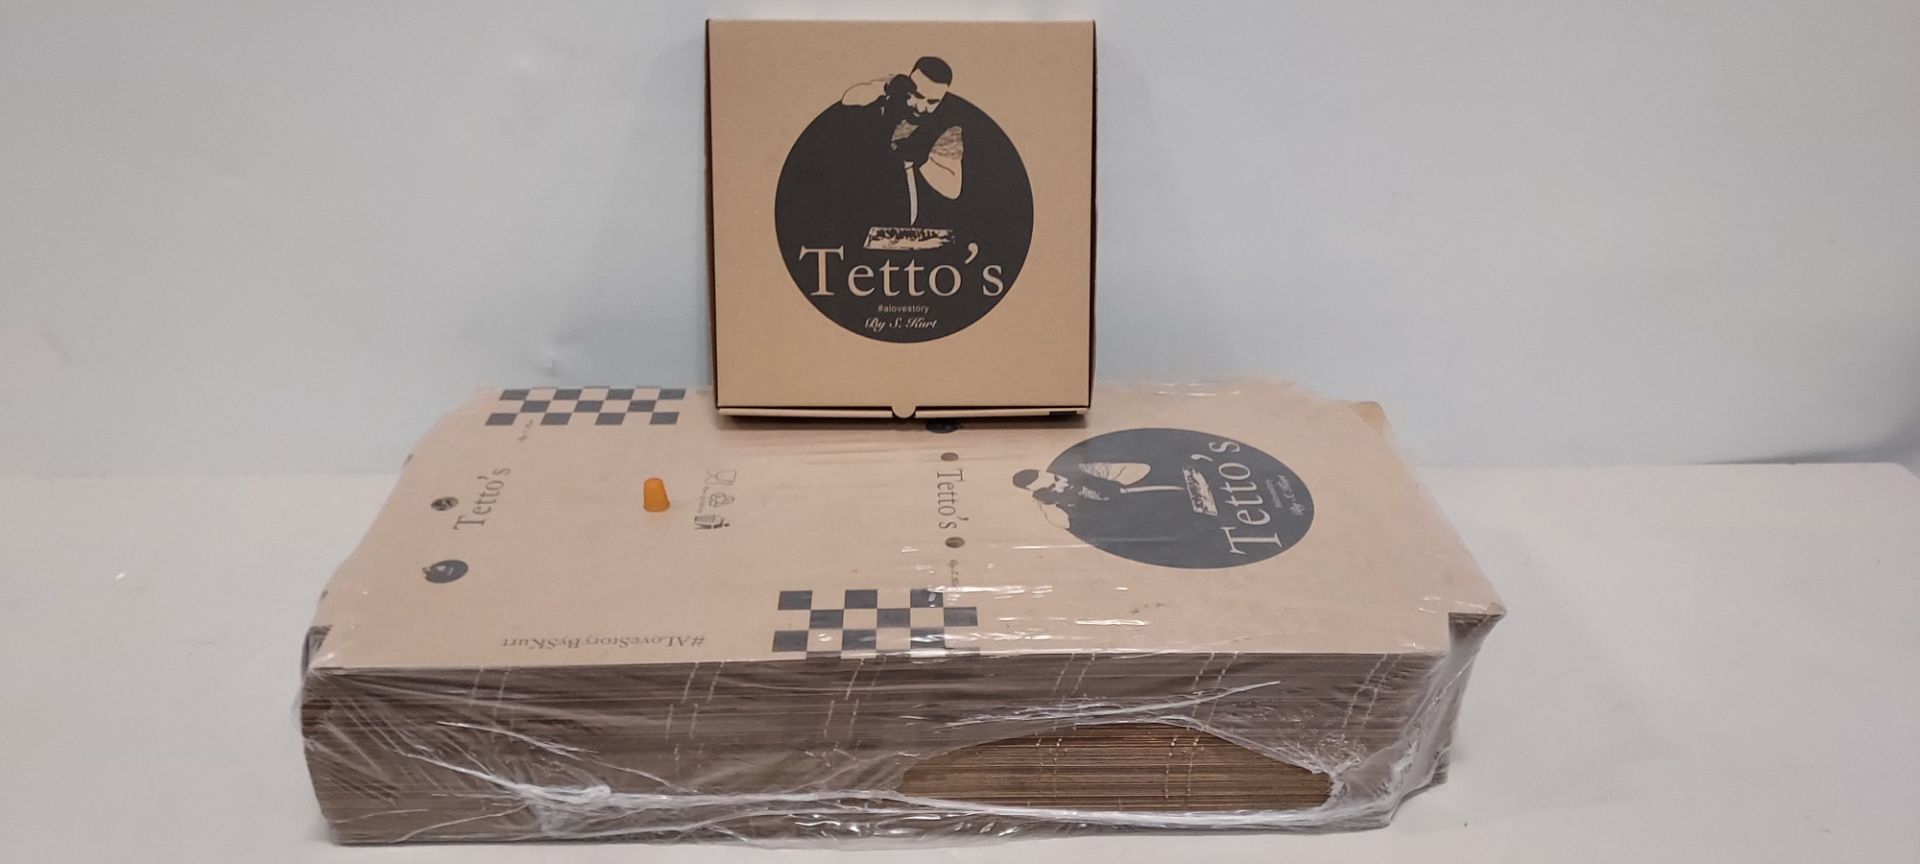 600 X BRAND NEW 12 INCH PIZZA BOXES - IN 6 PACKS OF 100 TETTO'S